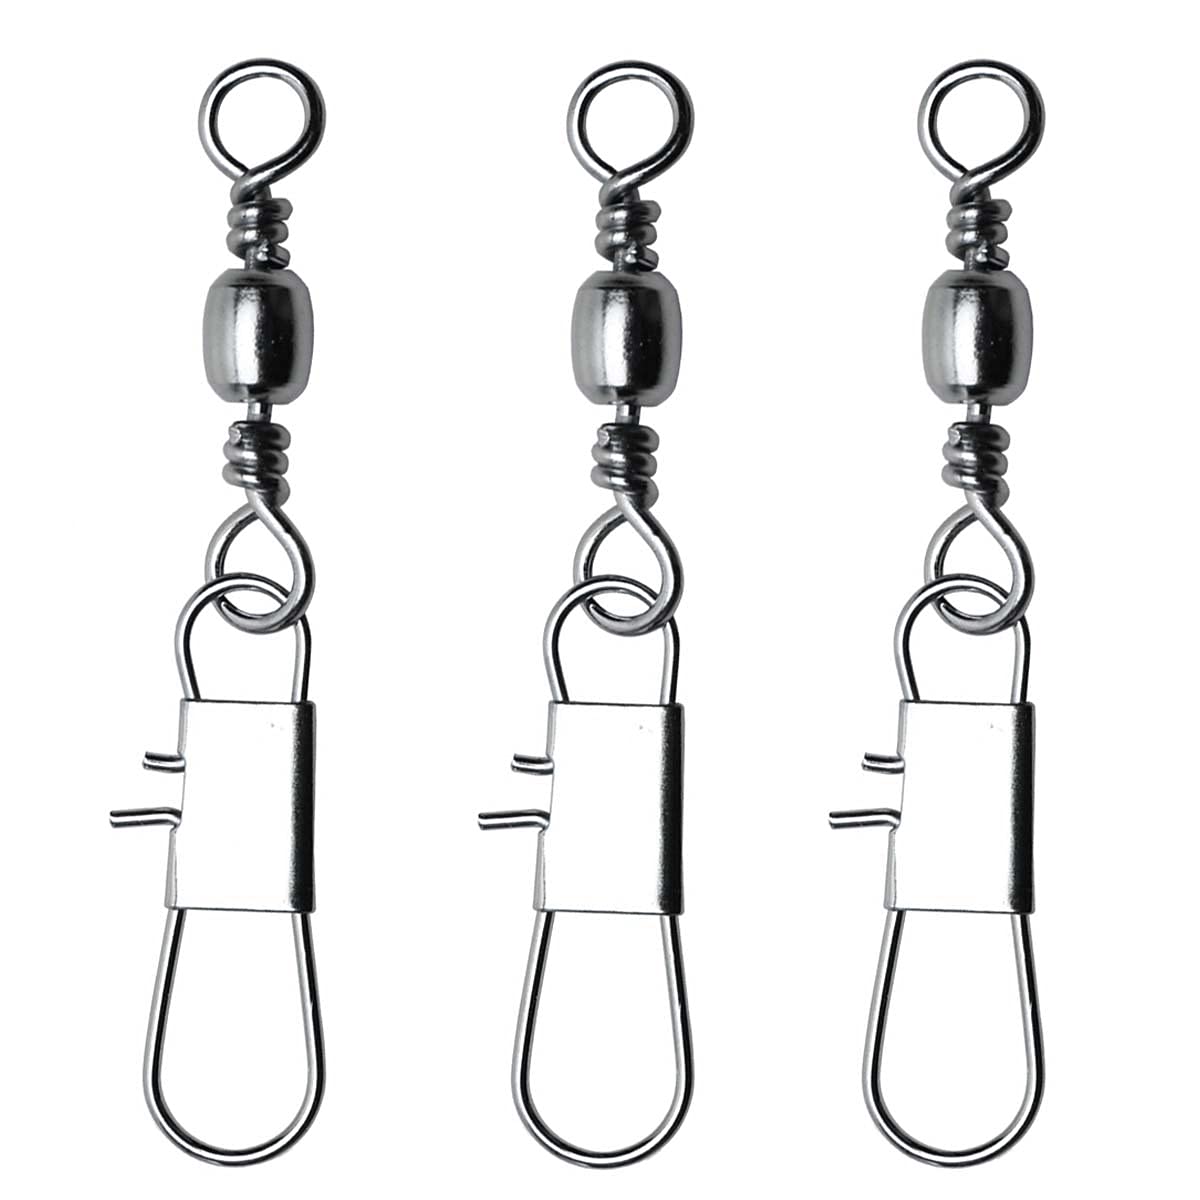 50/250pcs Fishing Barrel Swivels with Safety Snaps Swivel Stainless Steel  High Strength Interlock Snap Swivels